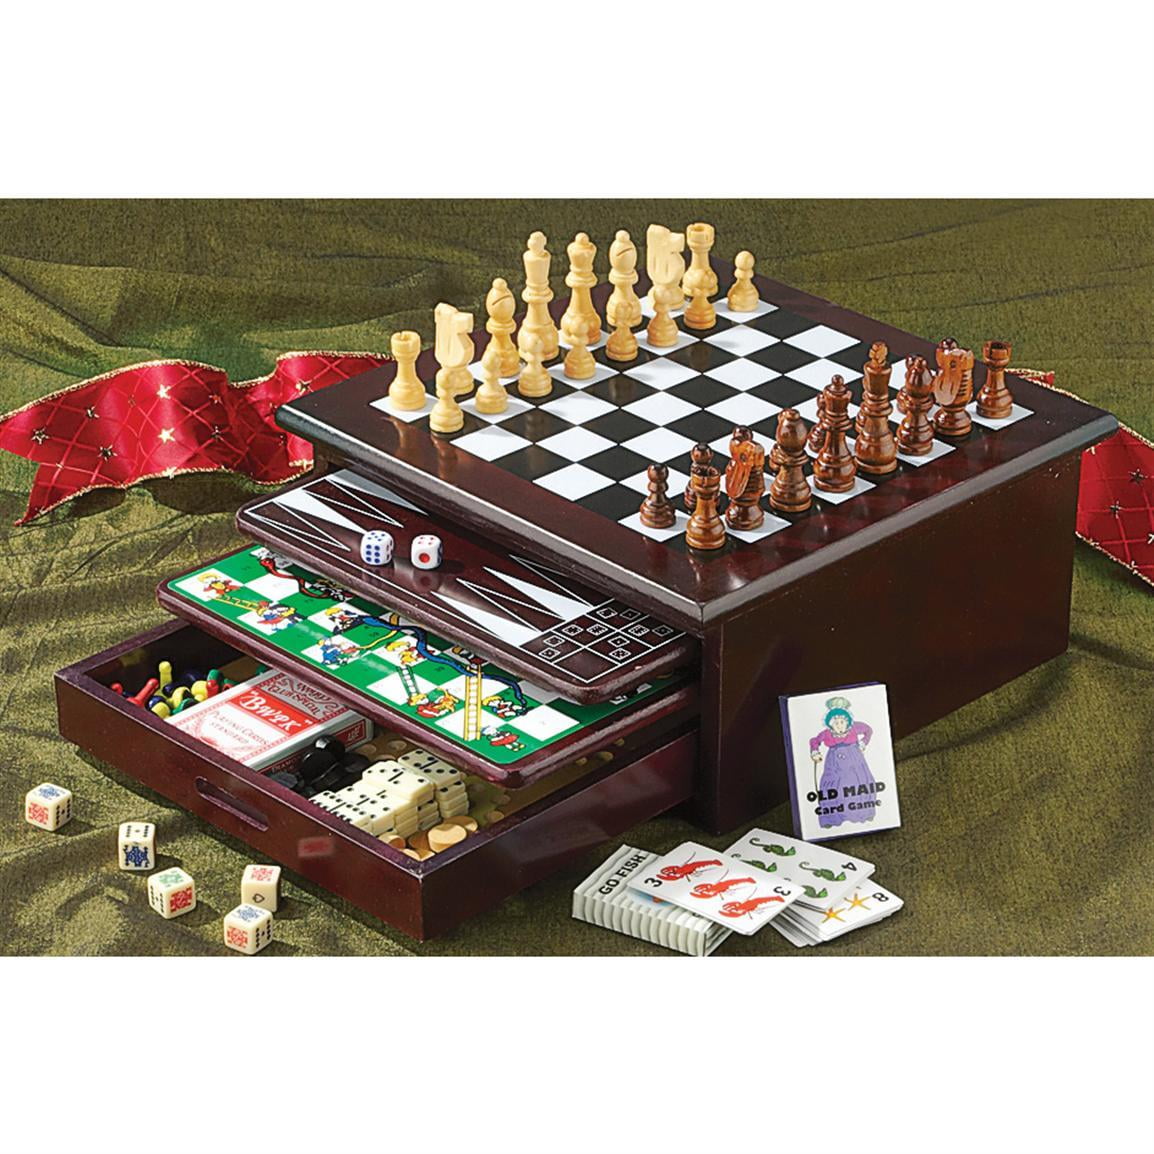 Chess Board & Pieces  Chess board, Money games, Board games